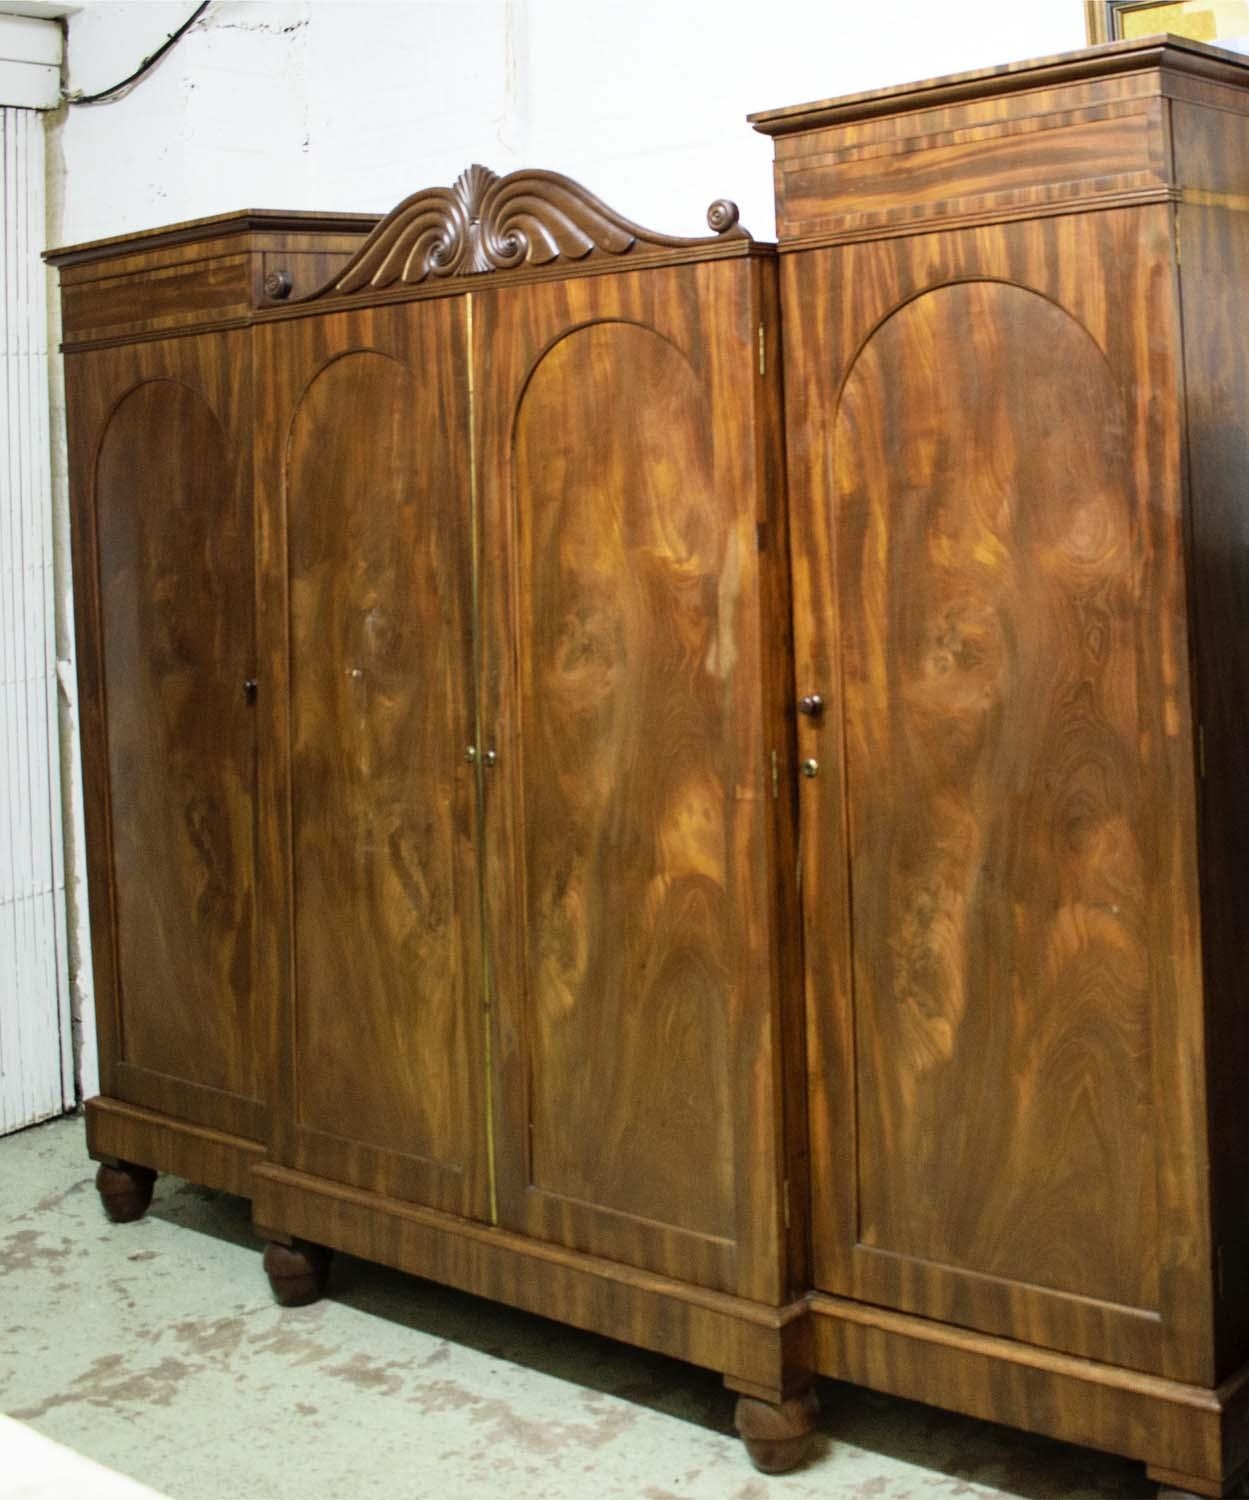 WARDROBE, 228cm L x 188cm H x 61cm D William IV mahogany with four arched panelled doors, the centre